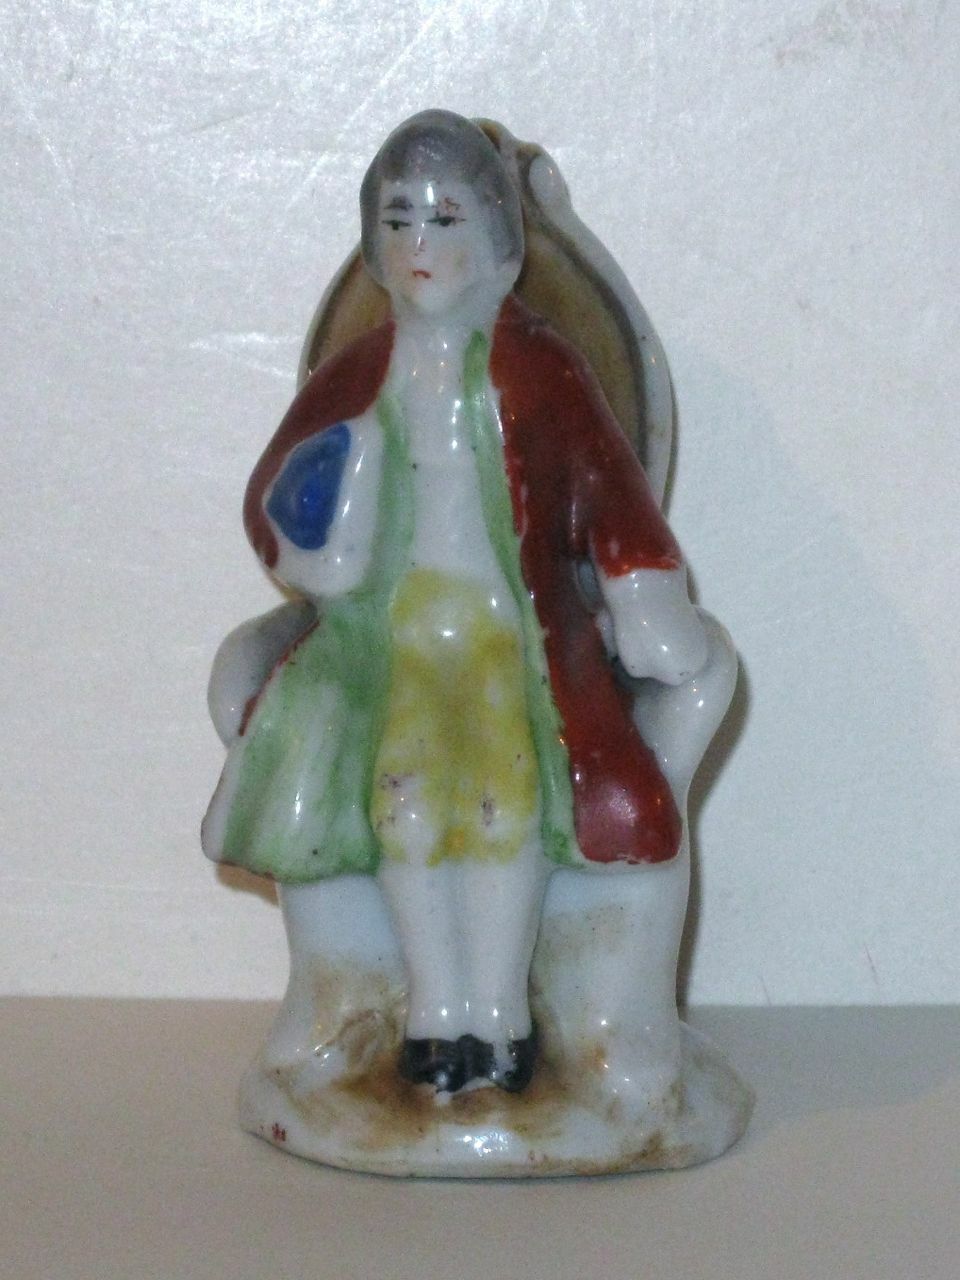 Vintage COLONIAL AMERICAN Figurine Seated with Tri-Corner Hat OCCUPIED JAPAN